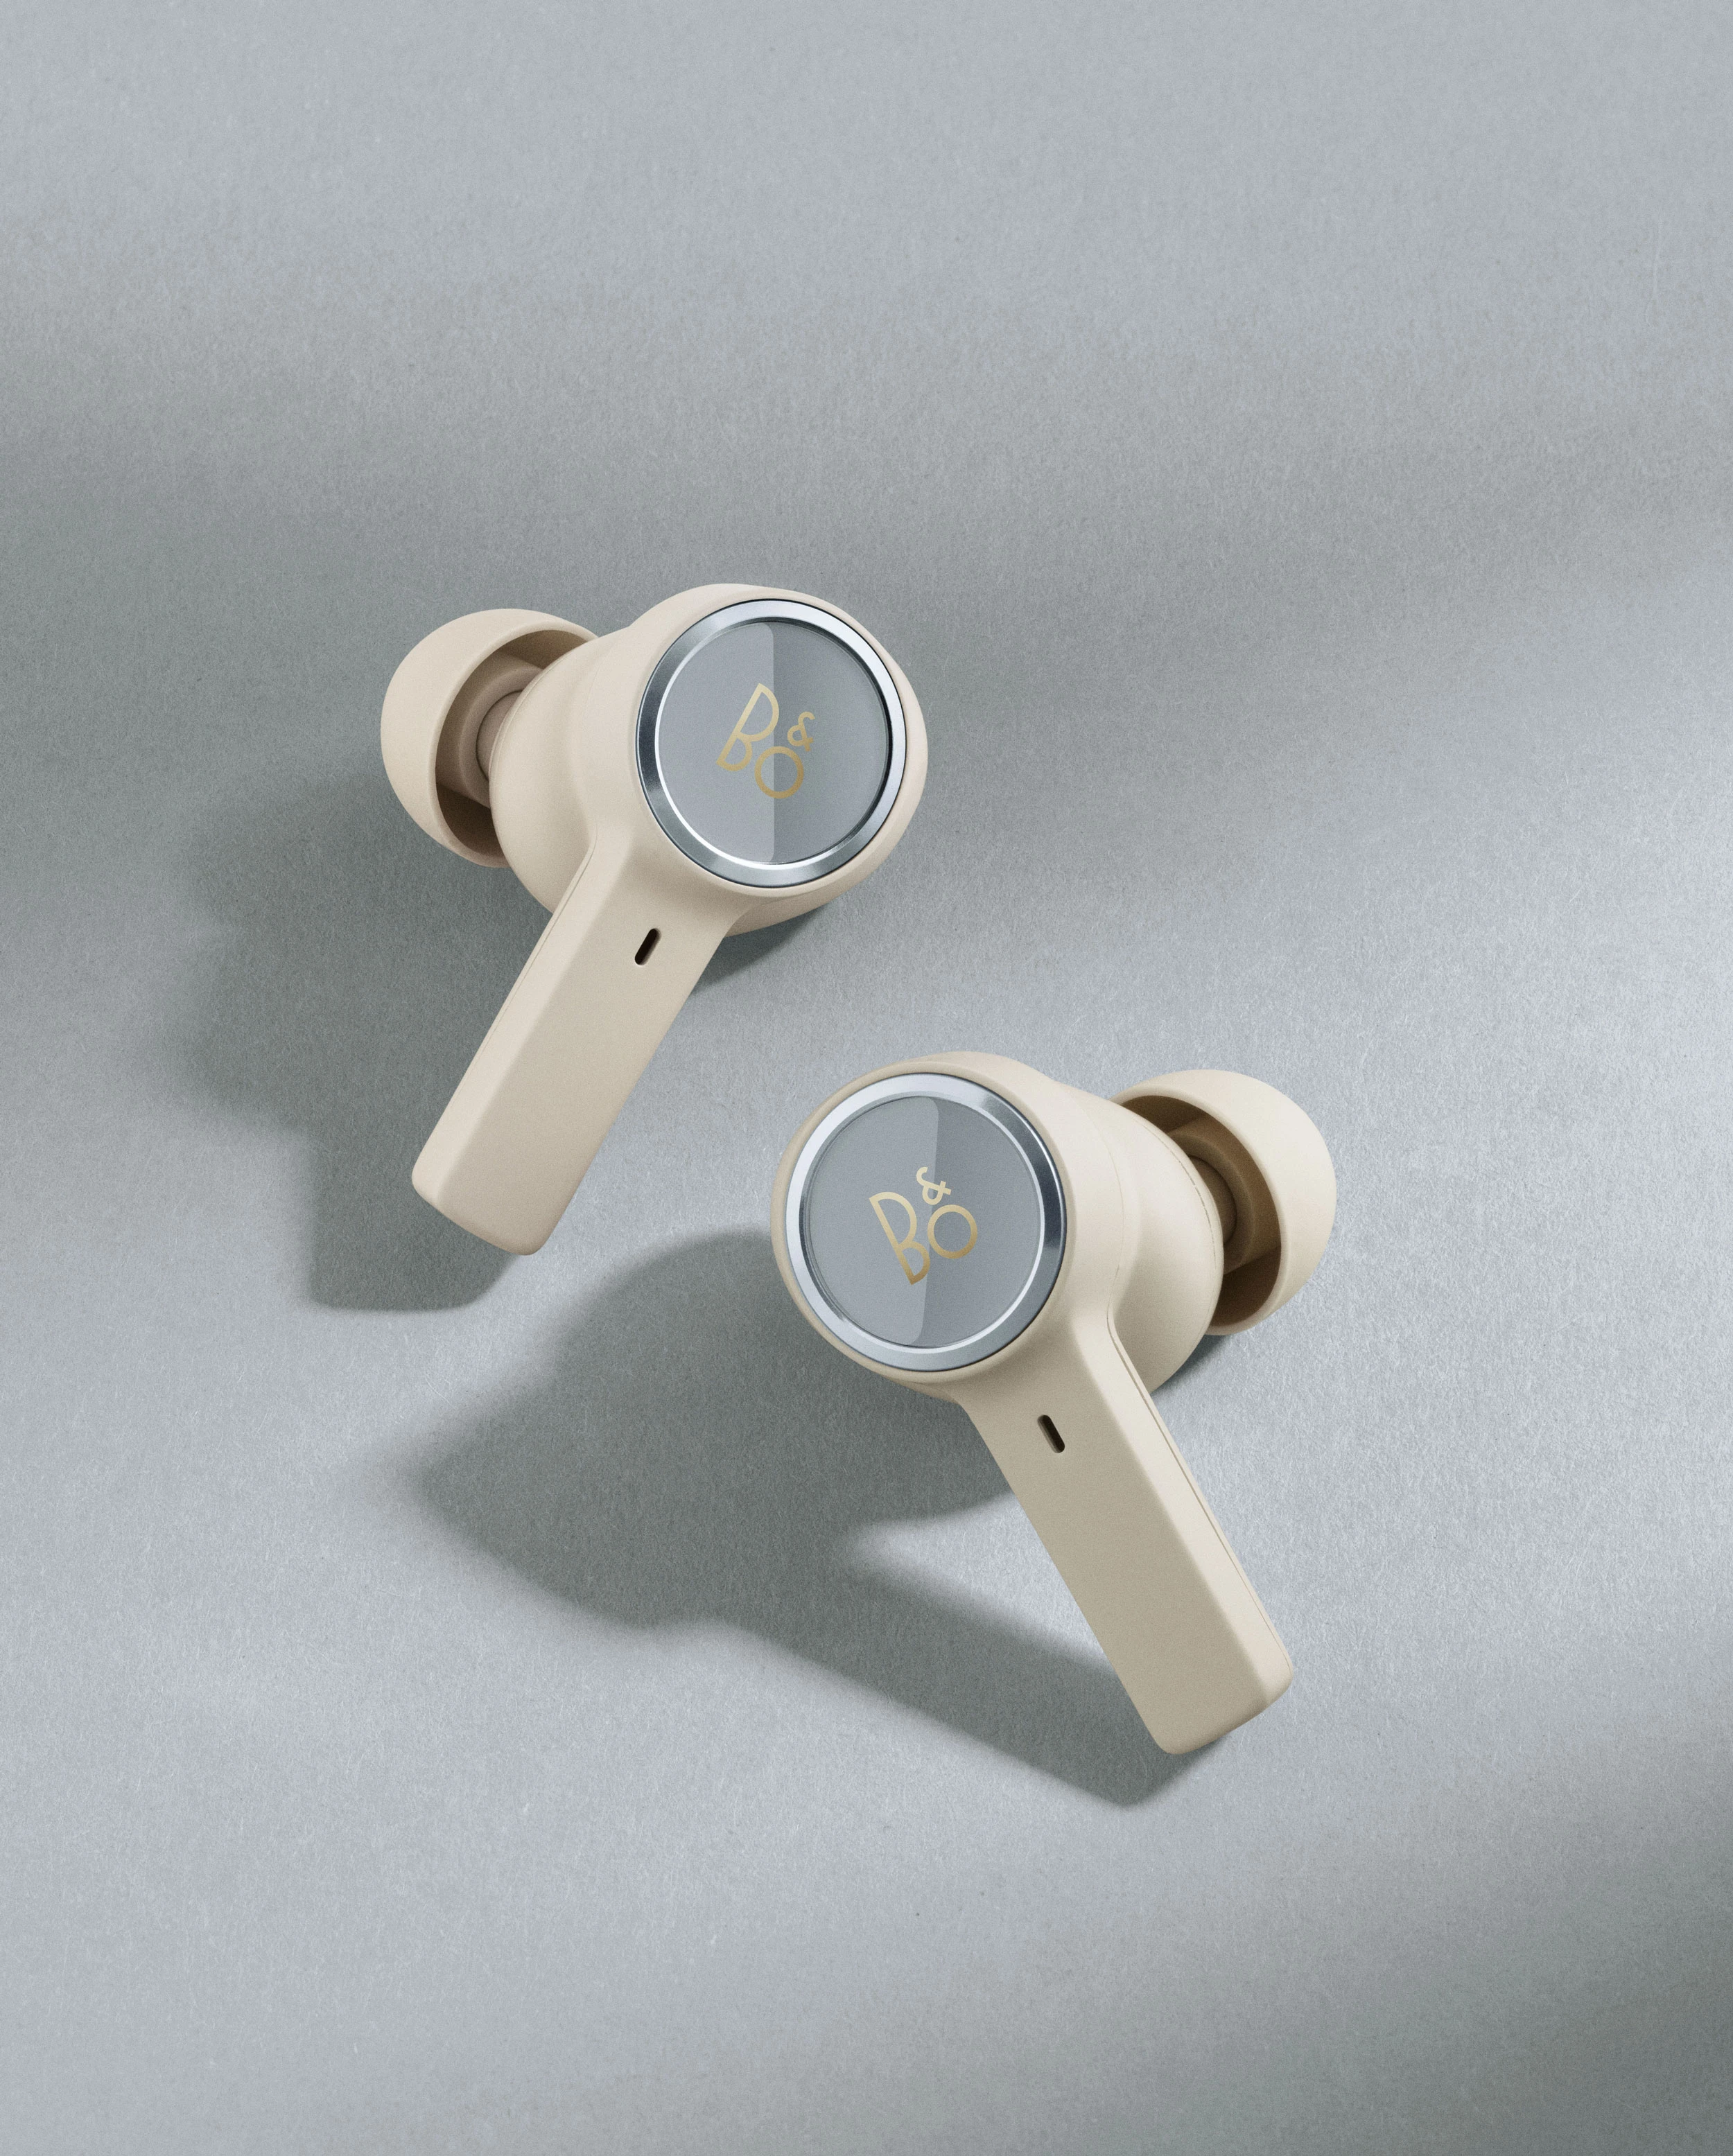 Image of the Beoplay EX earphones in the limited Hazy Blue Atelier Edition